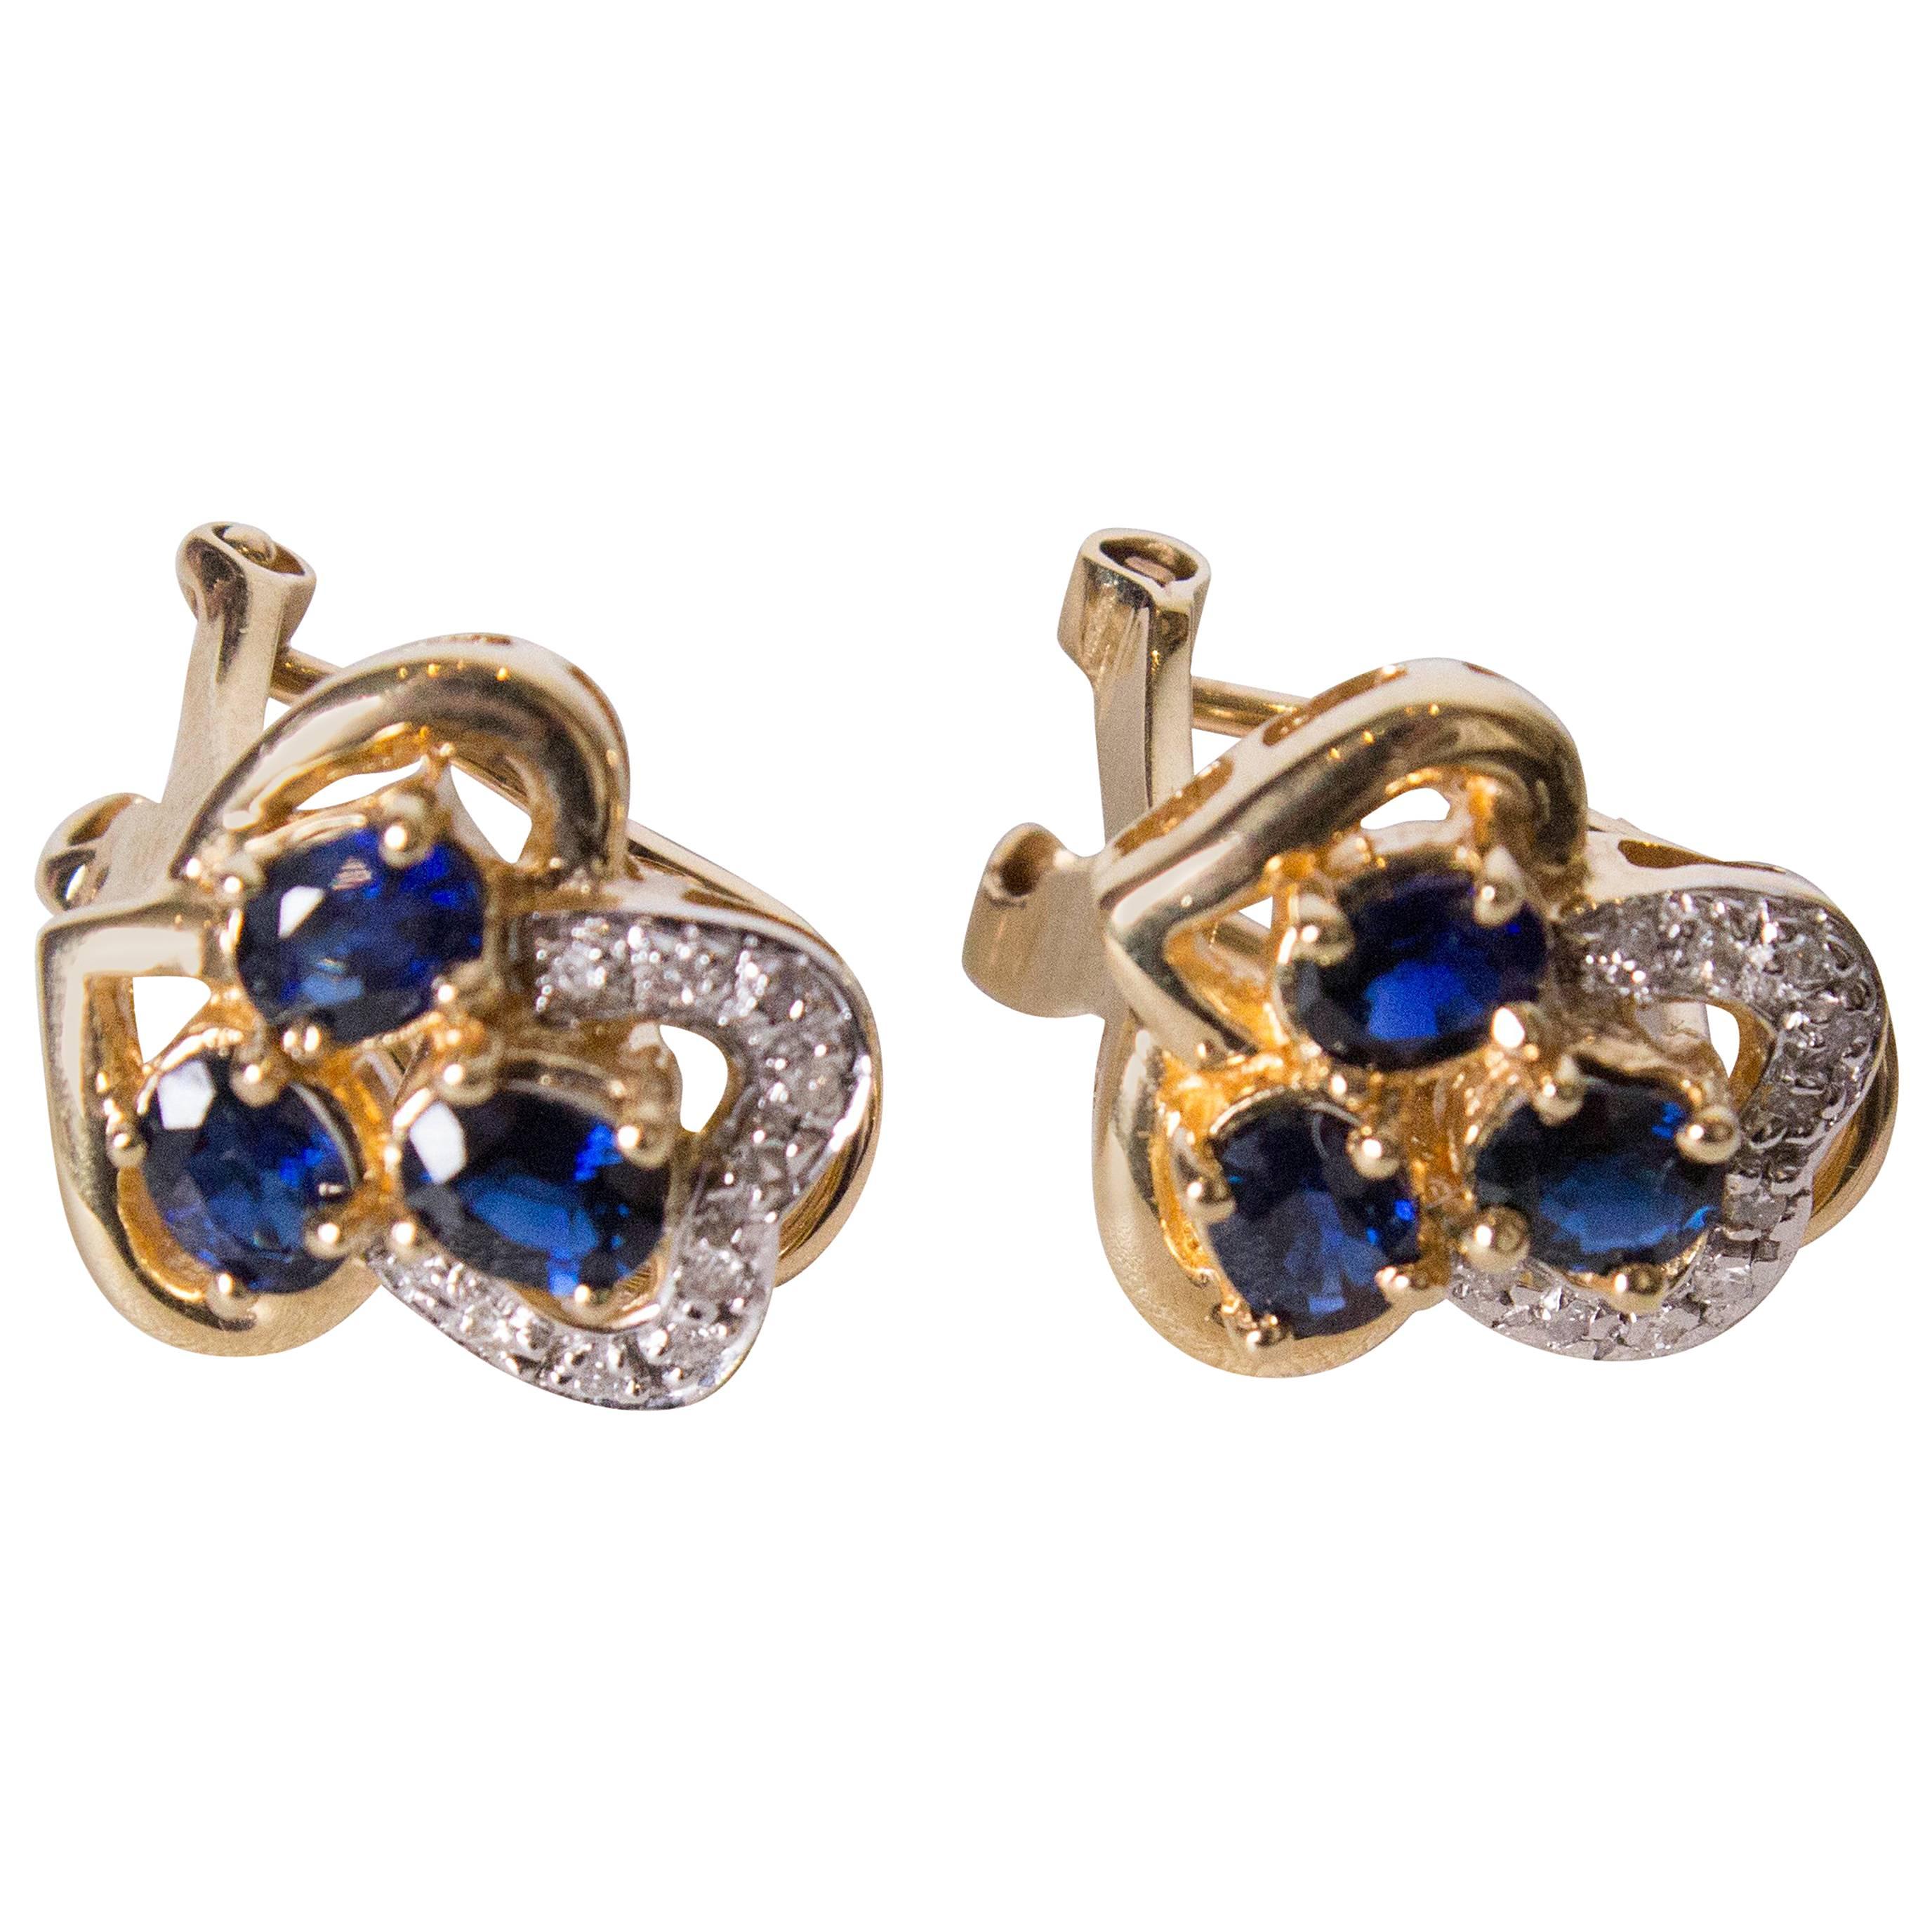 Sapphire and Diamond and Gold Earrings for Pierced Ears